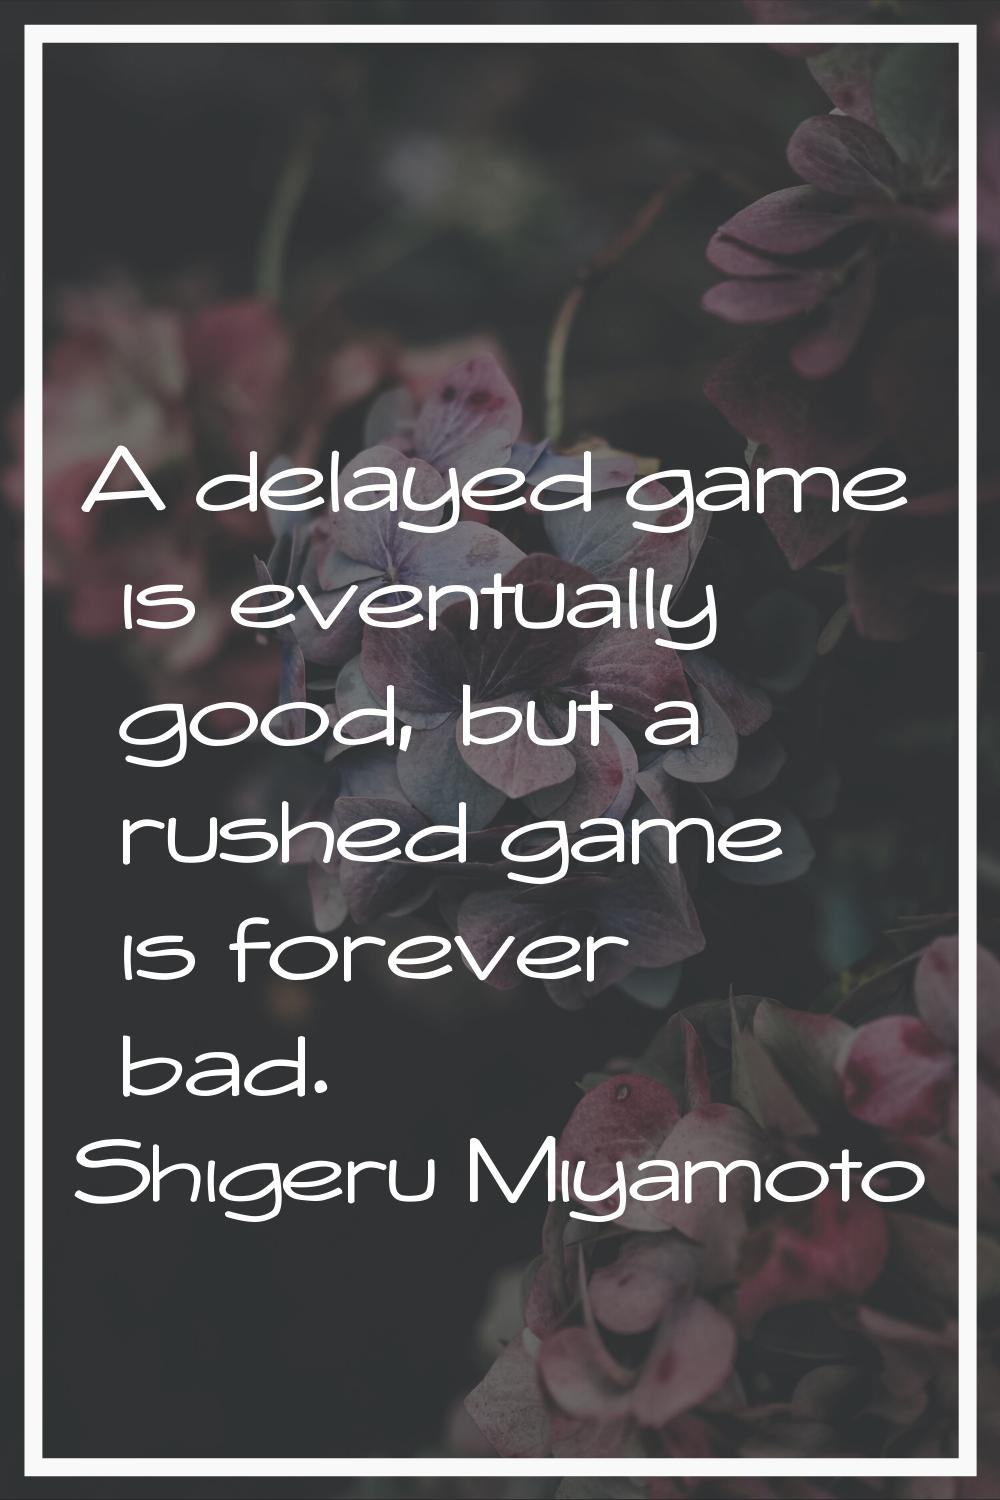 A delayed game is eventually good, but a rushed game is forever bad.